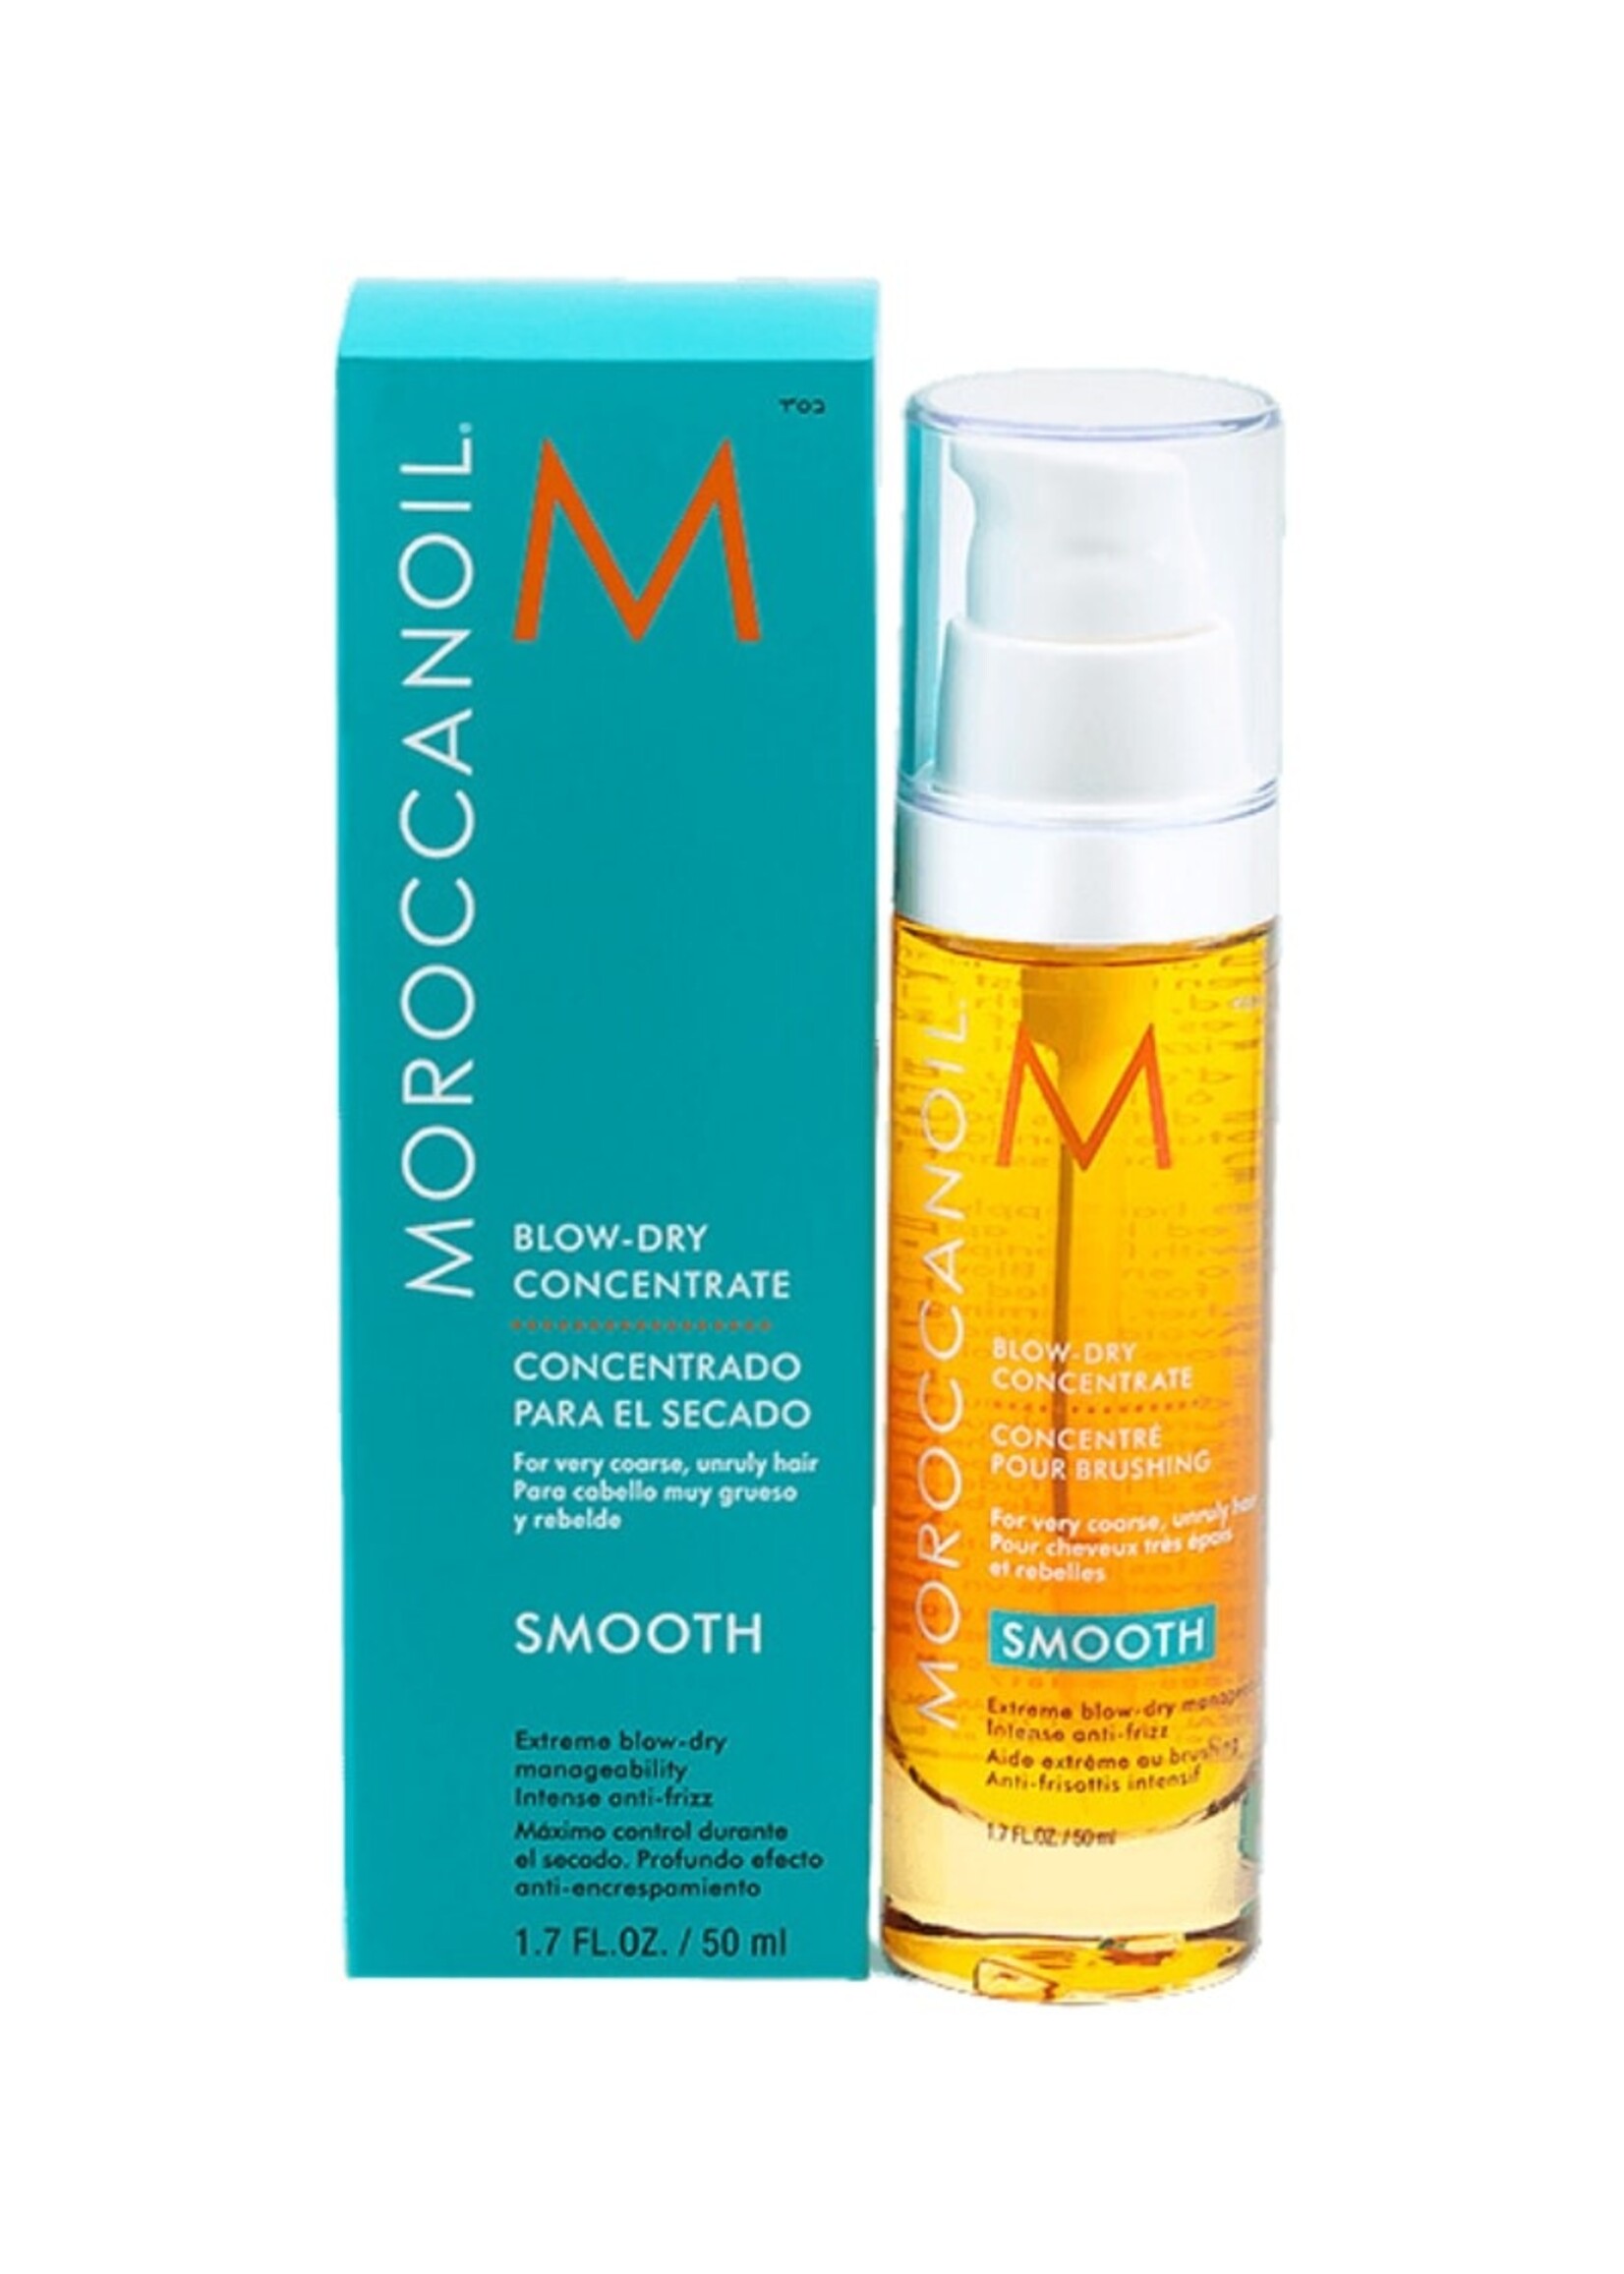 Moroccanoil Moroccanoil Blow Dry Concentrate 50ml